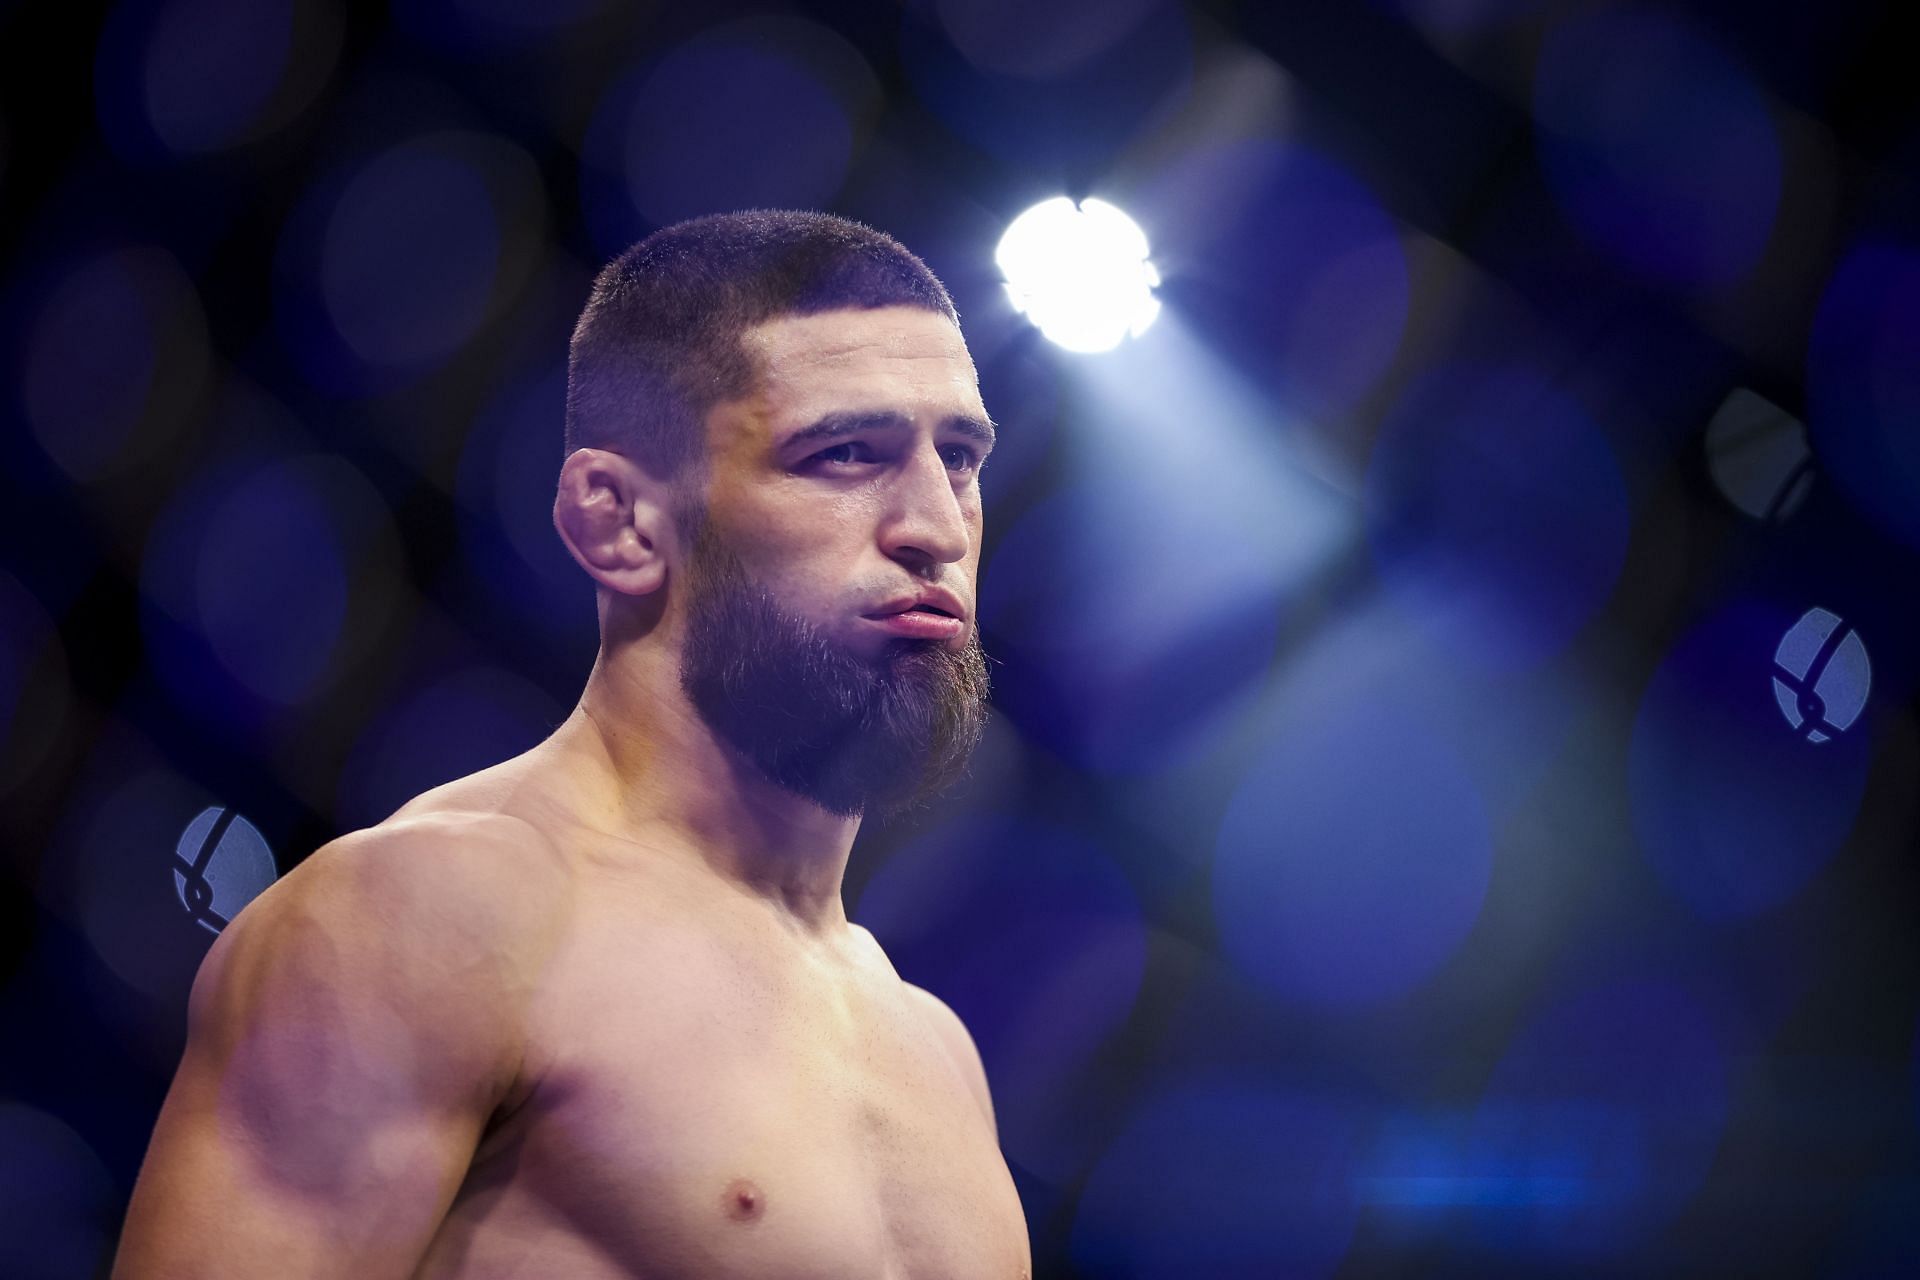 Khamzat Chimaev caused some controversy when weighing in for his bout with Li Jingliang